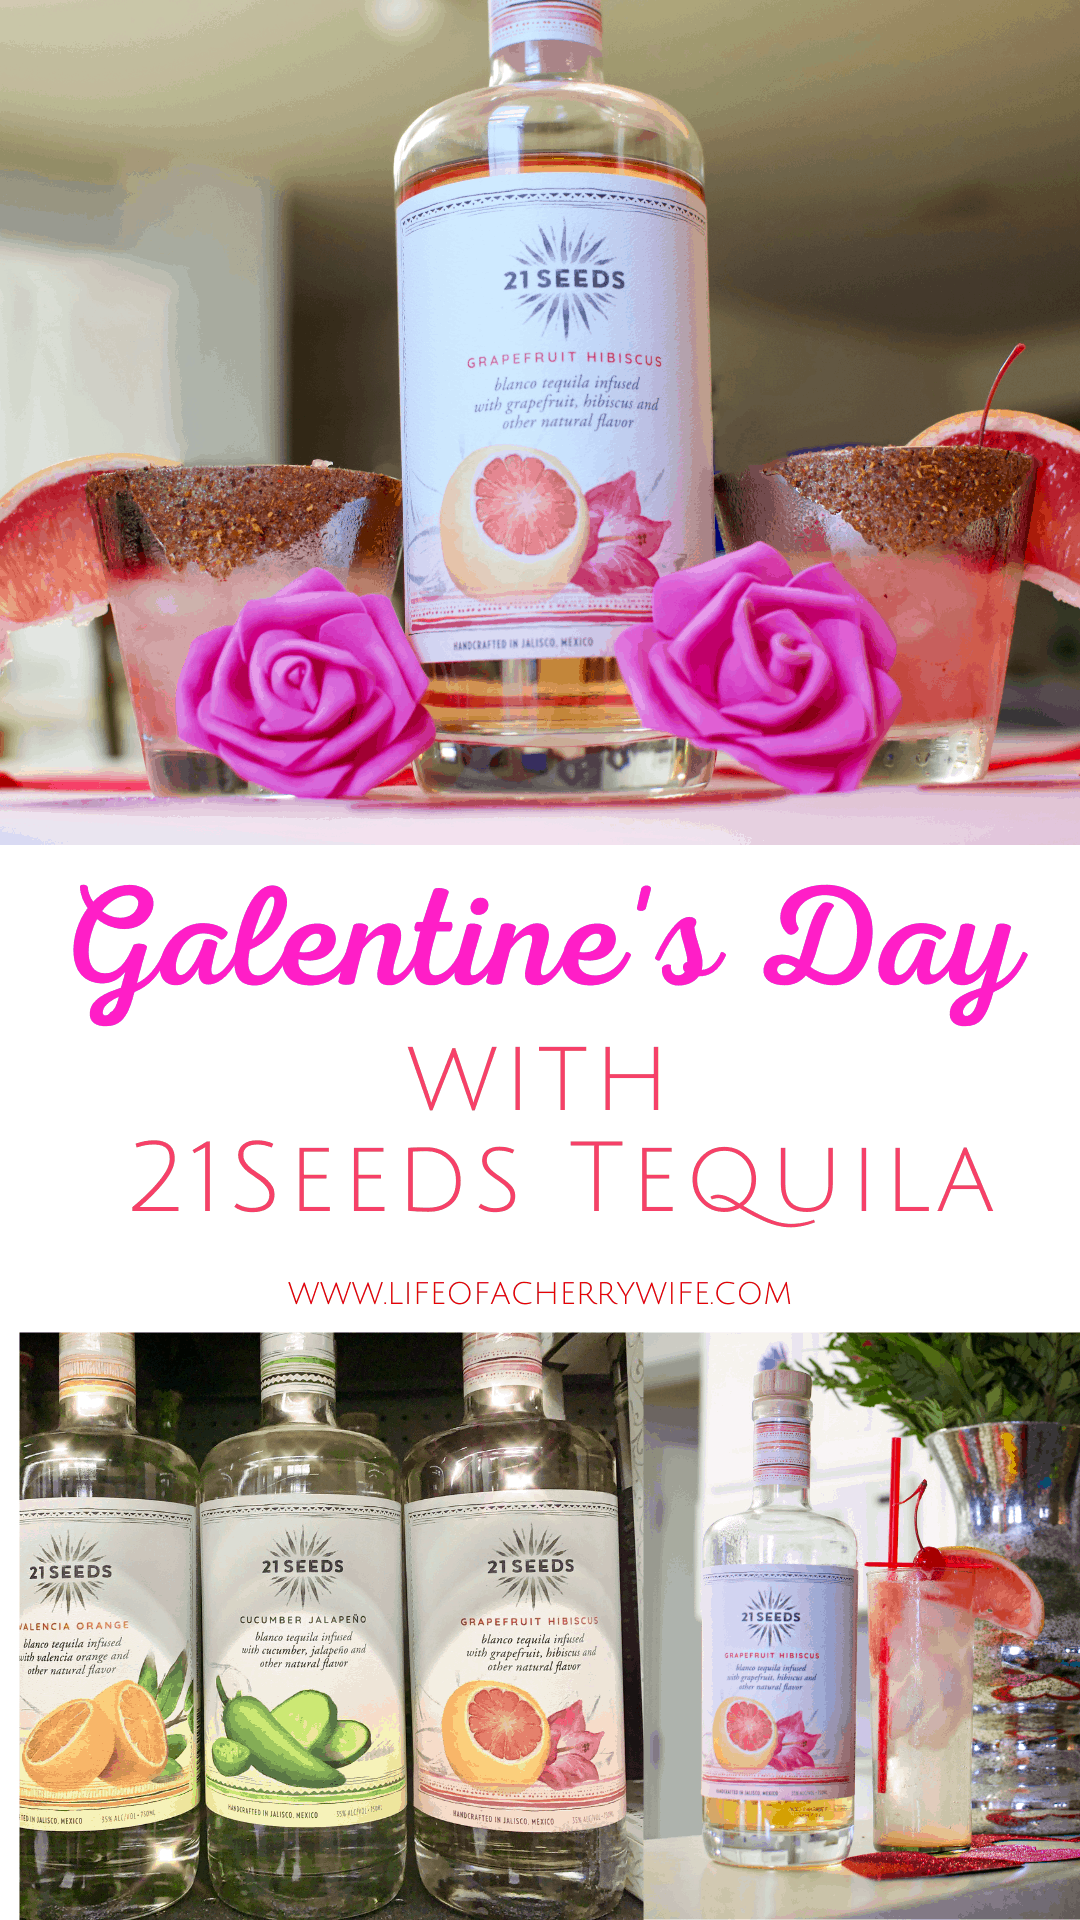 Galentine's Day with 21Seeds Tequila! SkinnySeed Paloma Recipe